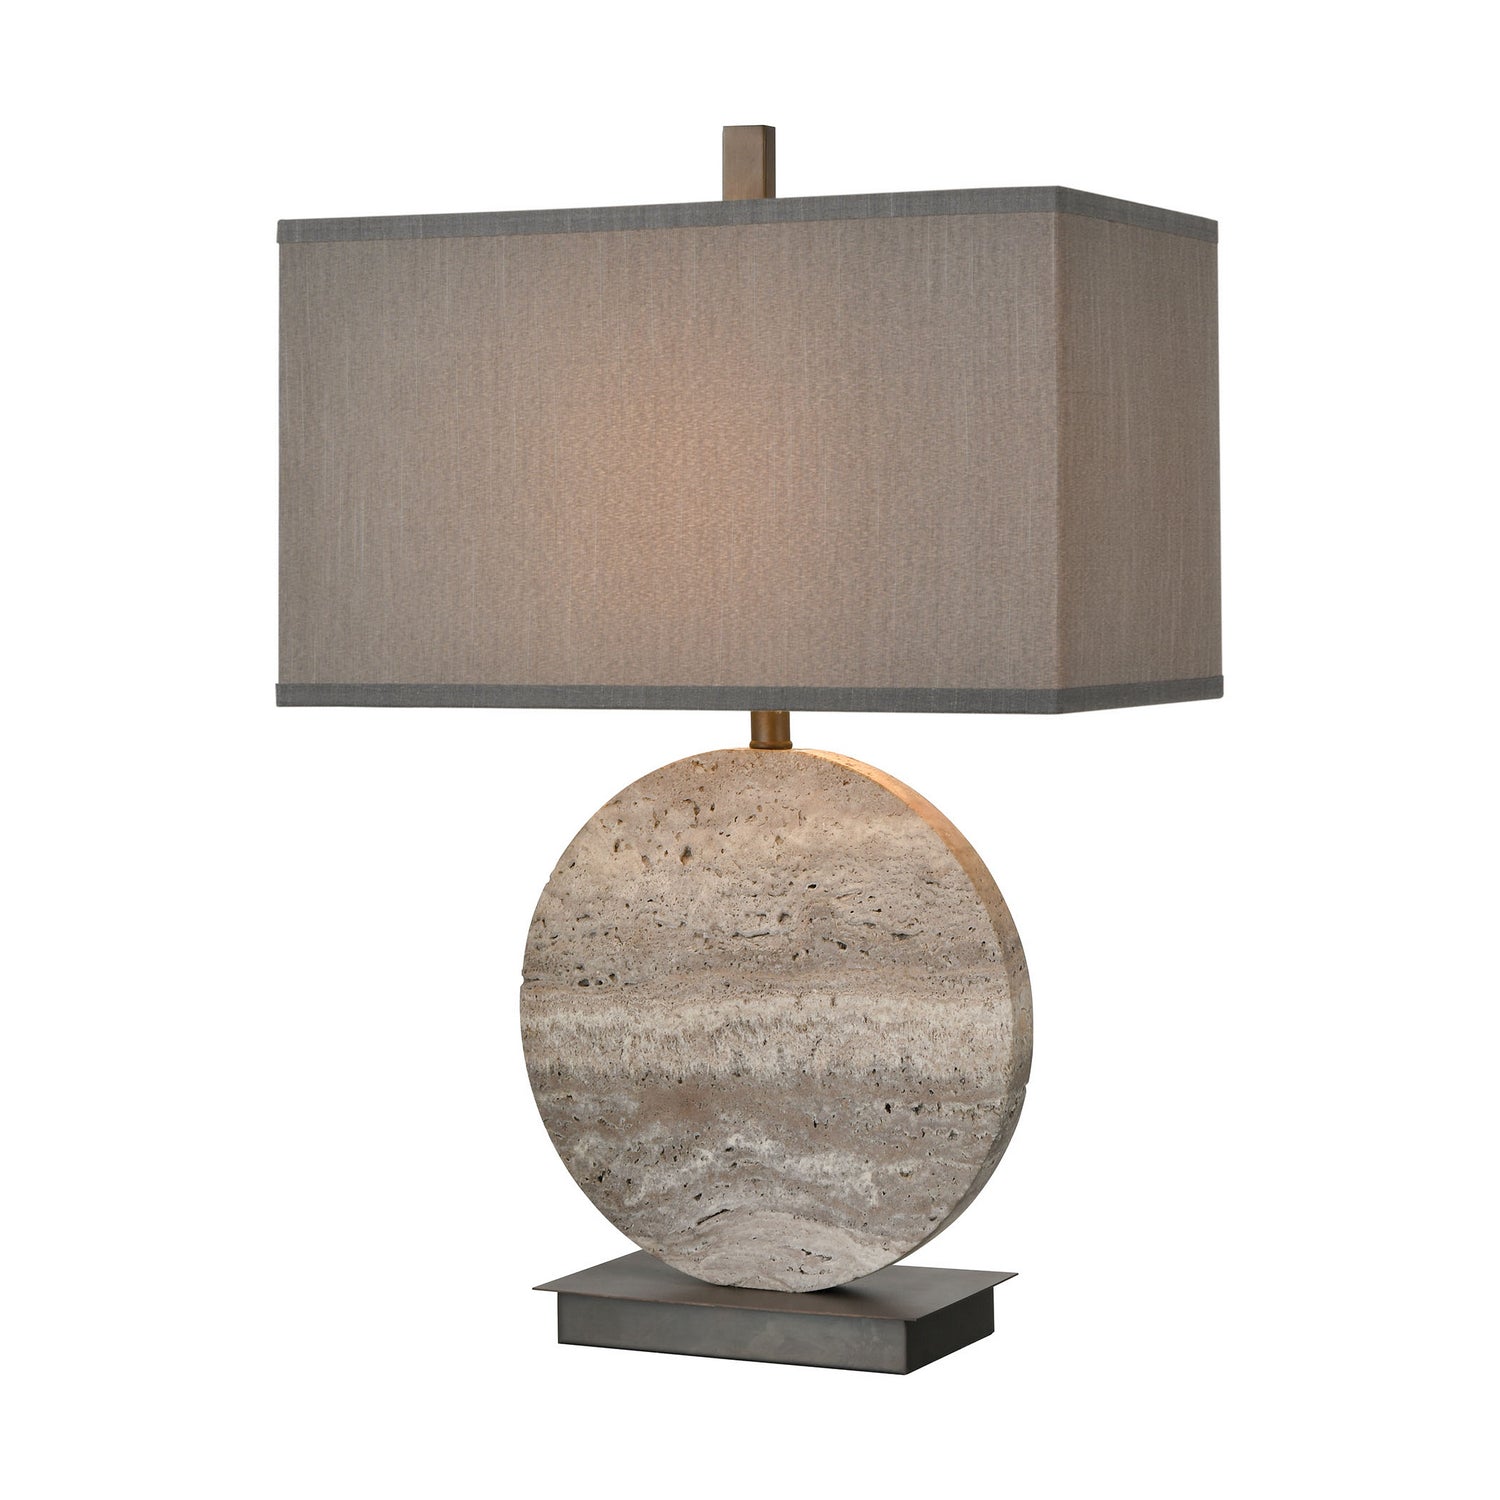 ELK Home - D4232 - One Light Table Lamp - Vermouth - Gray